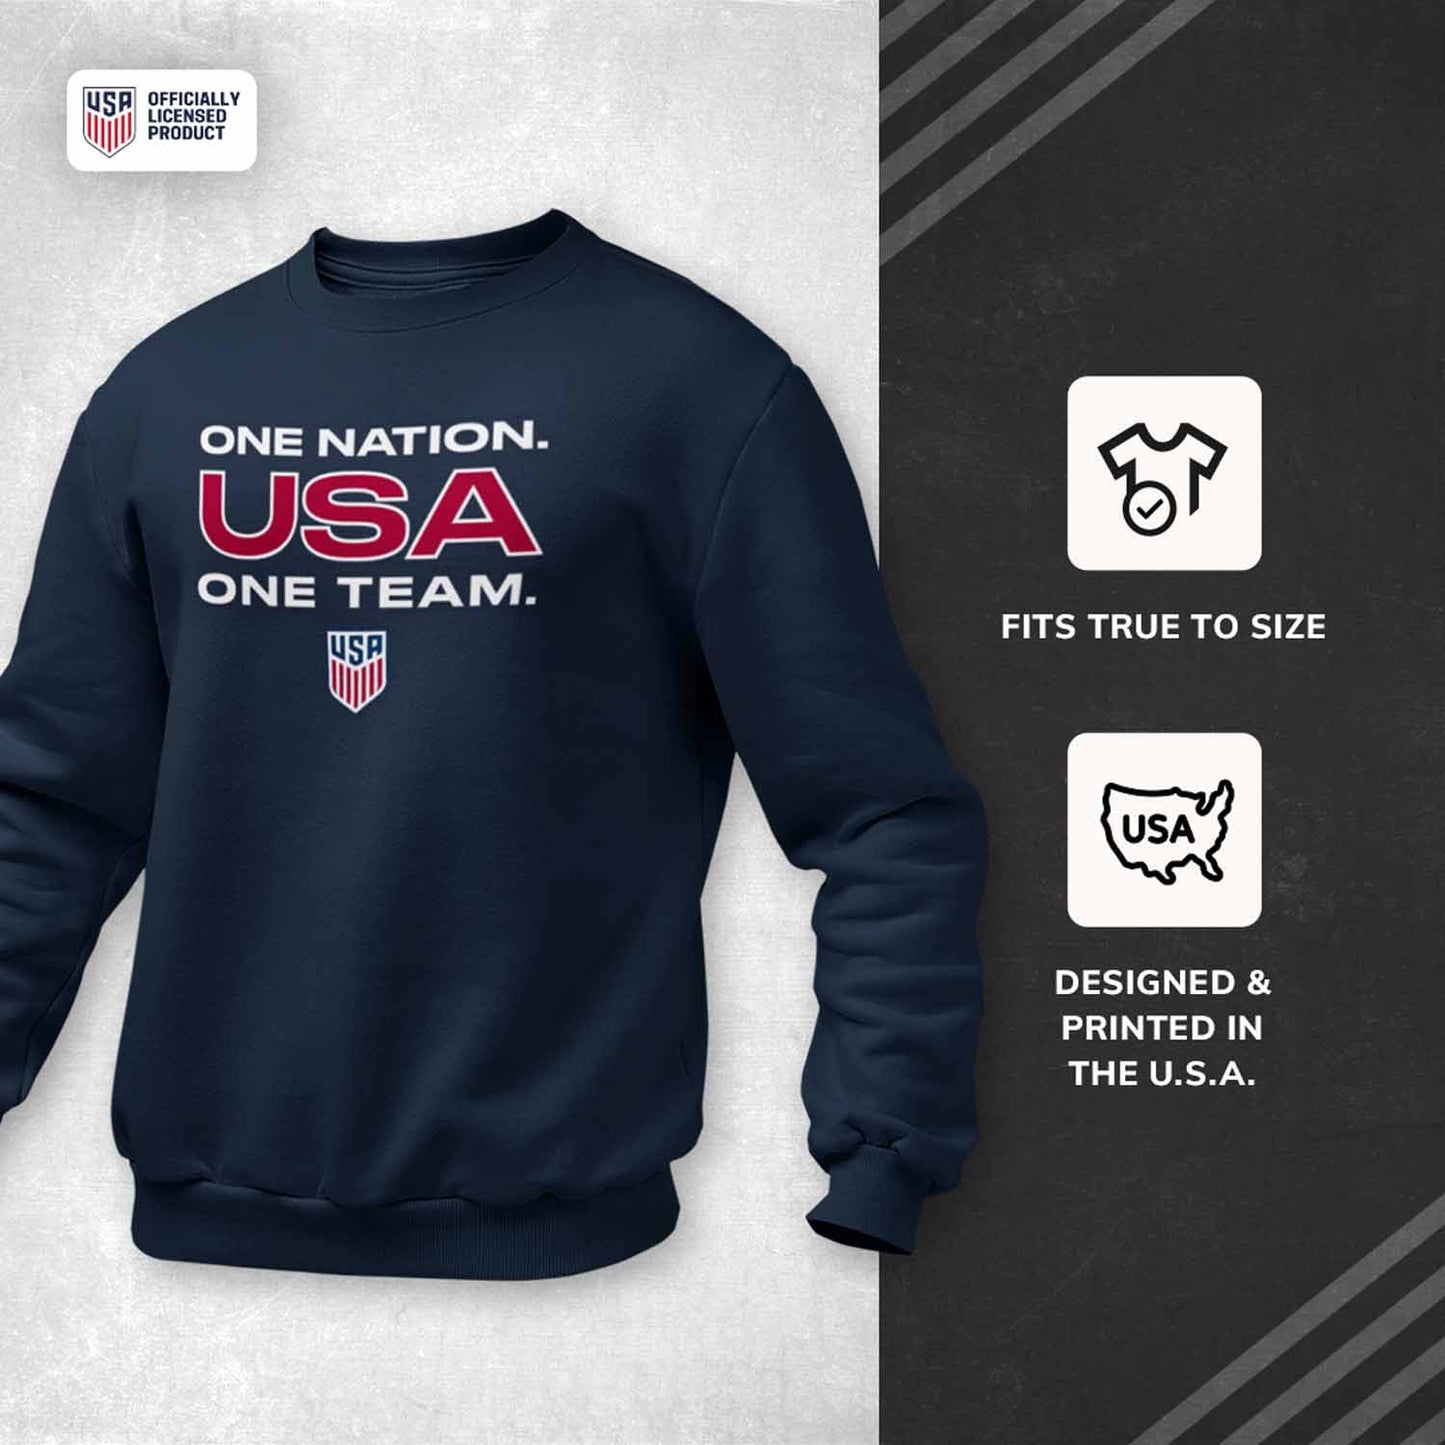 USA National Team The Victory Officially Licensed Unisex Adult US National Soccer Team One Nation One Team Slogan Crewneck Sweatshirt - Navy